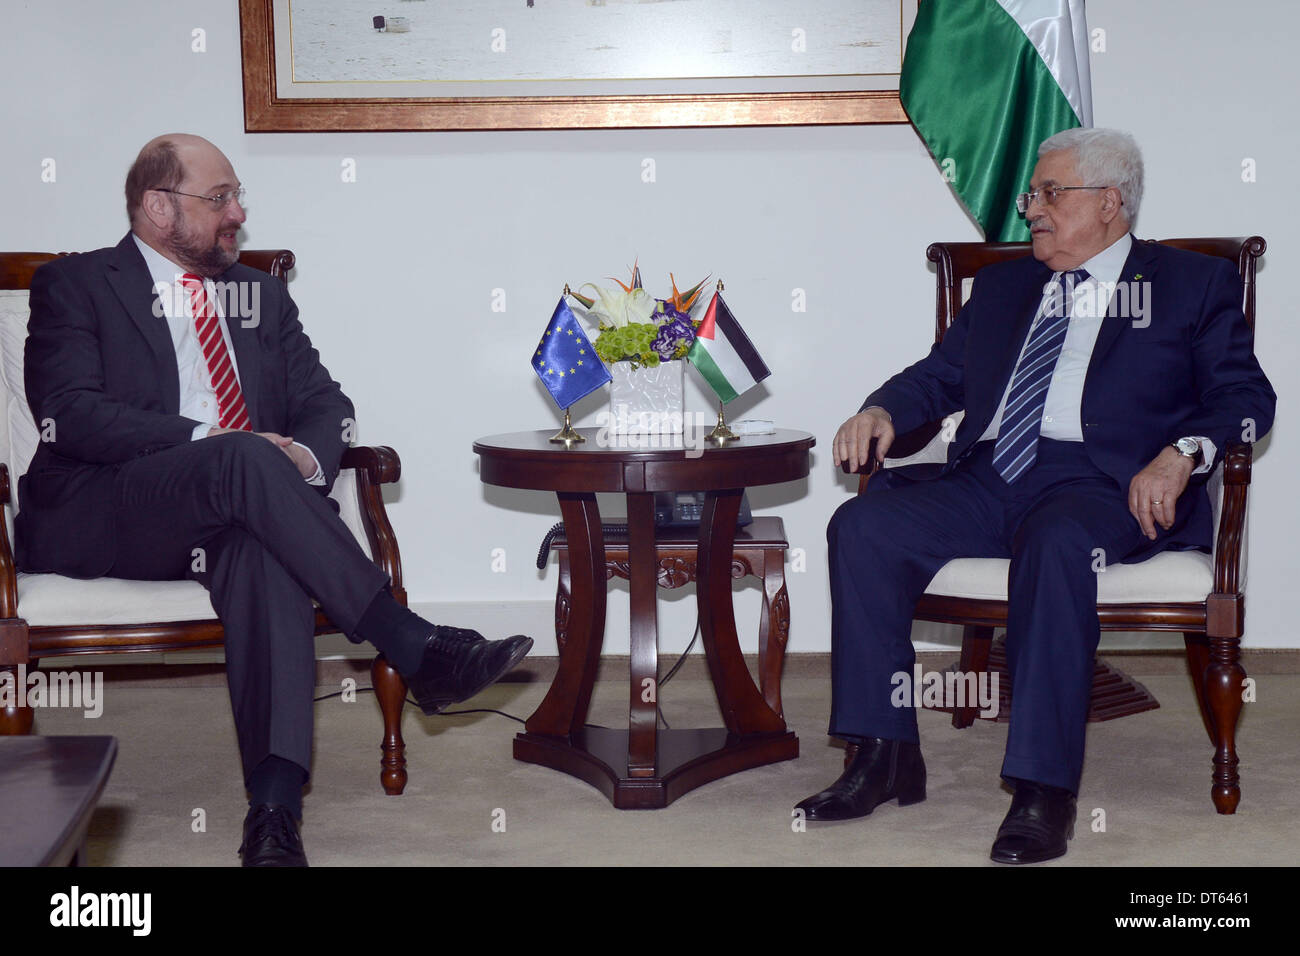 Ramallah, West Bank. 10th Feb, 2014. Palestinian President Mahmoud Abbas (R) meets with President of the European Parliament Martin Schulz in the West Bank city of Ramallah on Feb. 10, 2014. Credit: Xinhua/Pool/Alamy Live News Stock Photo